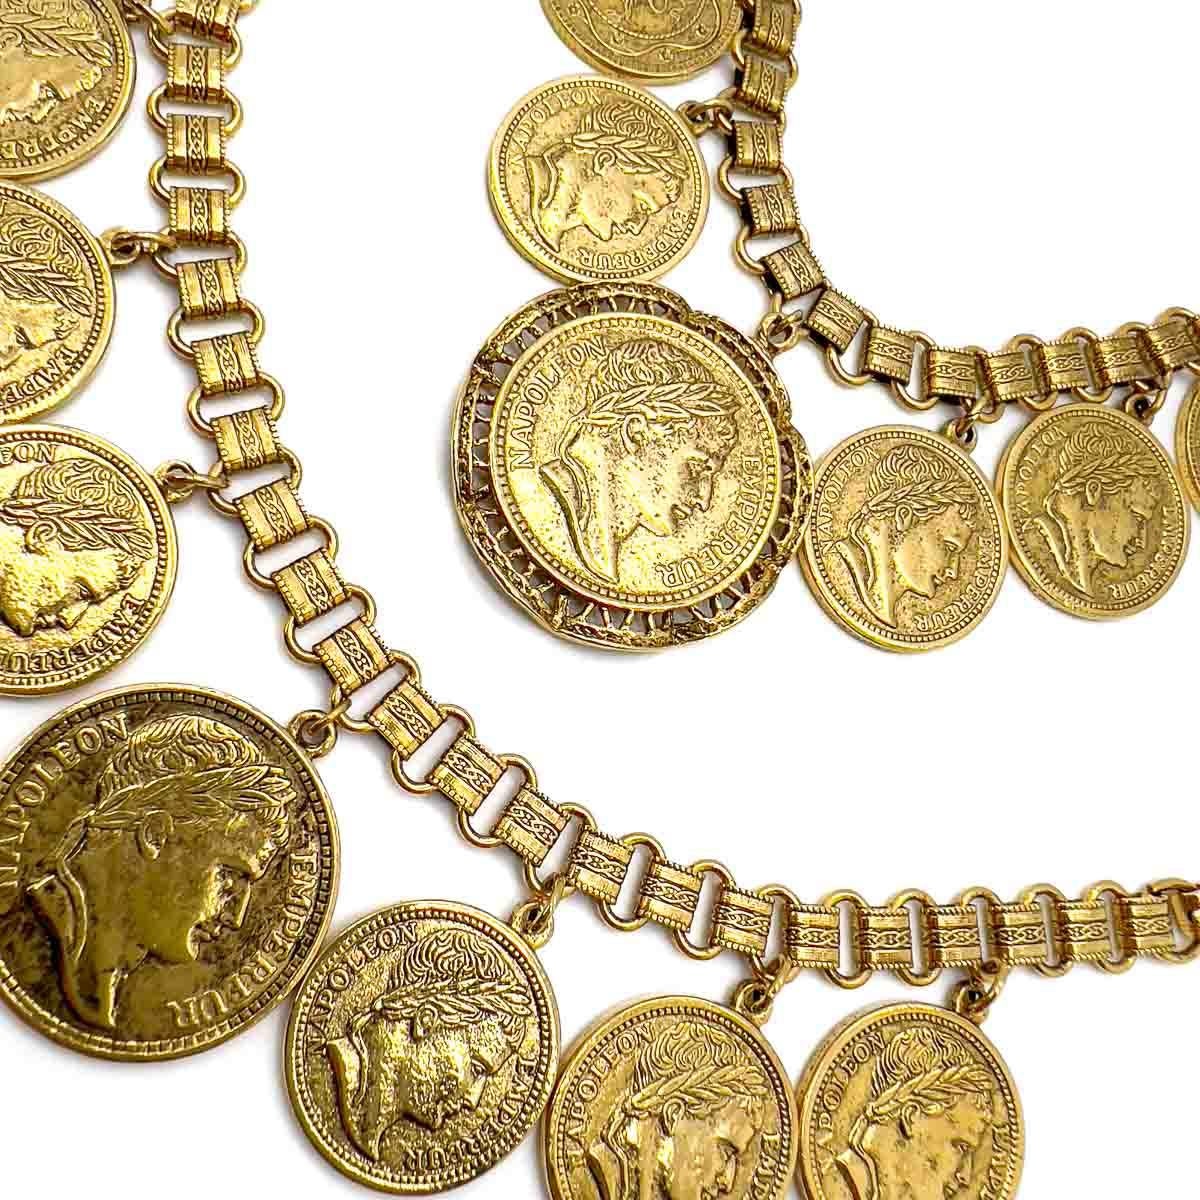 A Vintage Goldette Chunky Coin Necklace and Bracelet Set. With coin jewellery remaining at the height of fashion this is a glorious find. Why settle for just one piece when you can amp up your look with the matching suite. An incredible find